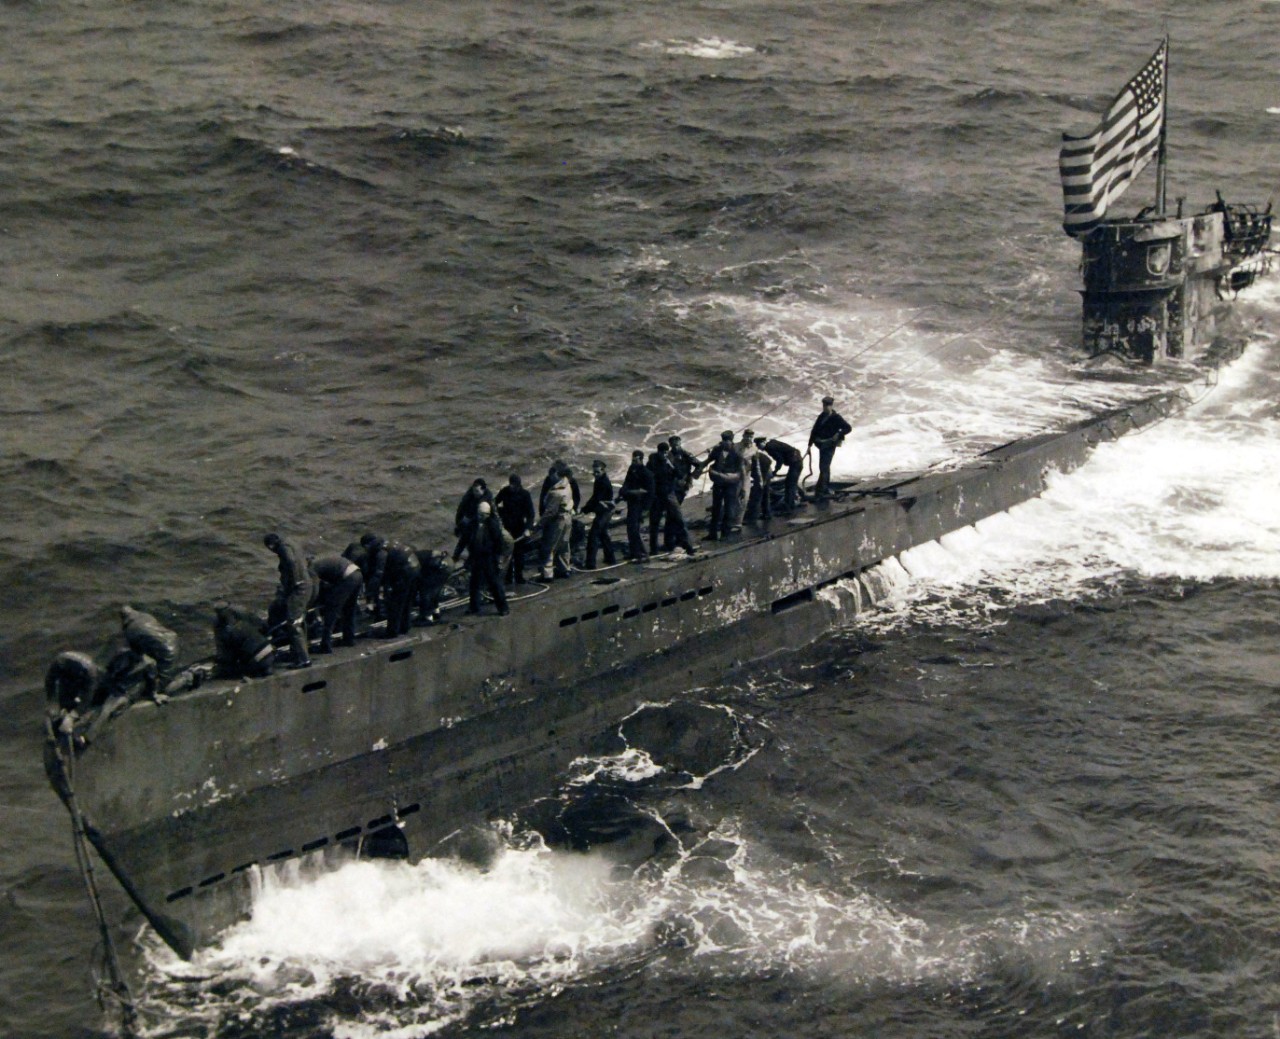 80-G-49172: Capture of German Submarine U-505, June 4, 1944. Members of the boarding party from USS Pillsbury (DE 133) secure the tow-line to the bow of the captured German submarine, U-505. Because the sea was sweeping across the deck amidships,...